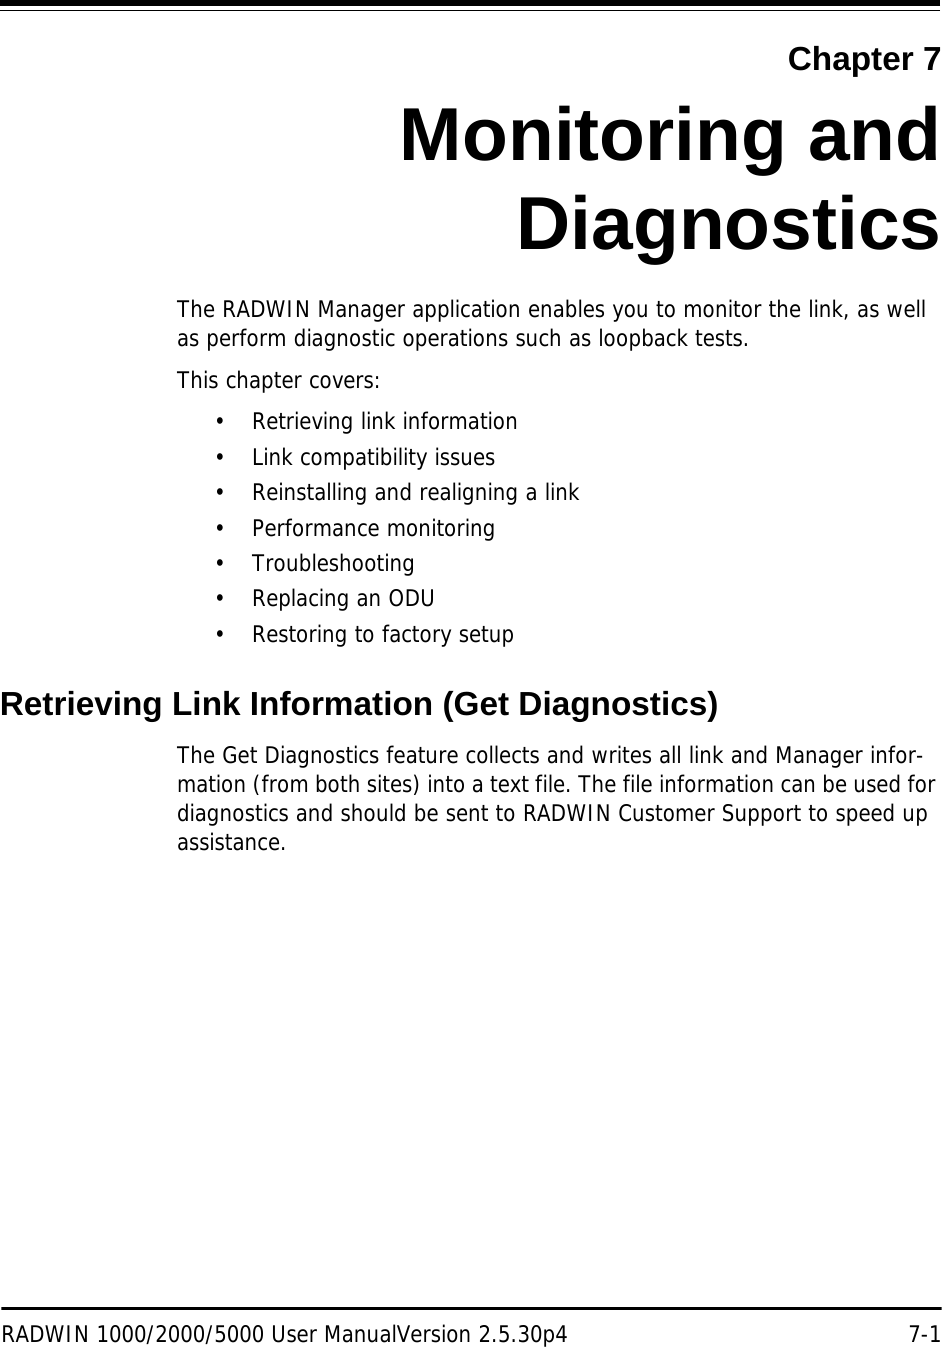 RADWIN 1000/2000/5000 User ManualVersion 2.5.30p4 7-1Chapter 7Monitoring andDiagnosticsThe RADWIN Manager application enables you to monitor the link, as well as perform diagnostic operations such as loopback tests. This chapter covers:• Retrieving link information• Link compatibility issues• Reinstalling and realigning a link• Performance monitoring• Troubleshooting• Replacing an ODU• Restoring to factory setupRetrieving Link Information (Get Diagnostics)The Get Diagnostics feature collects and writes all link and Manager infor-mation (from both sites) into a text file. The file information can be used for diagnostics and should be sent to RADWIN Customer Support to speed up assistance.